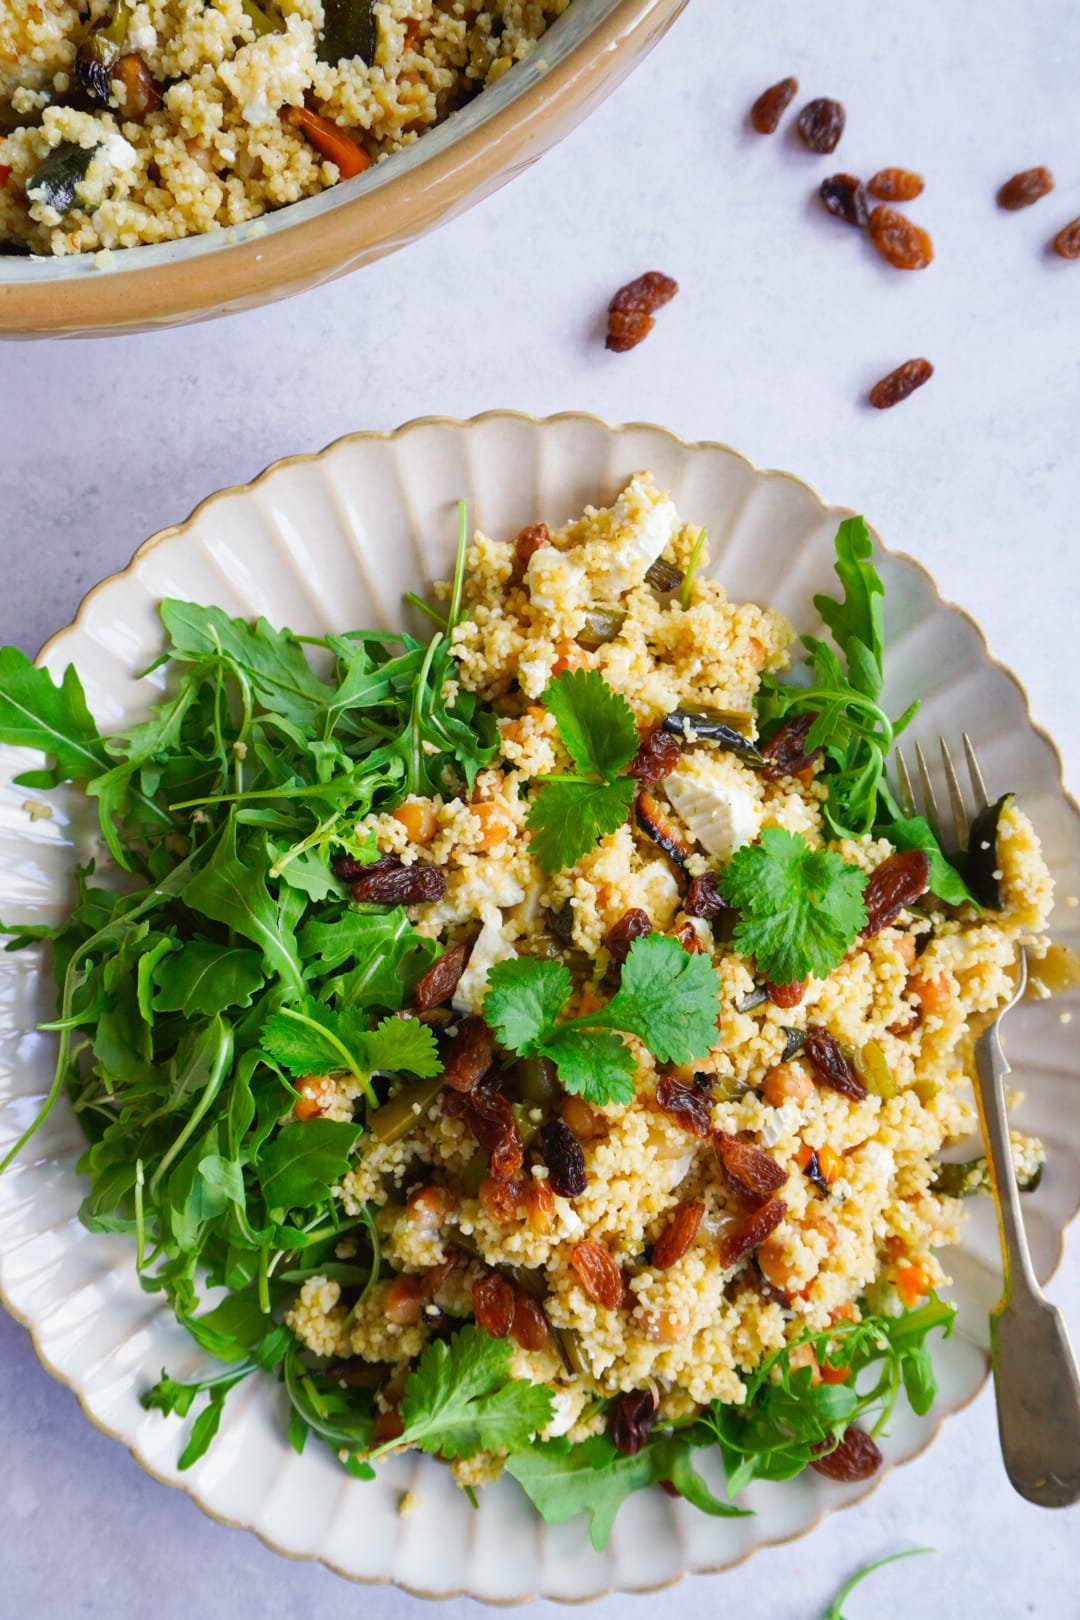 Roasted vegetable couscous salad served with feta cheese, arugula and sultanas